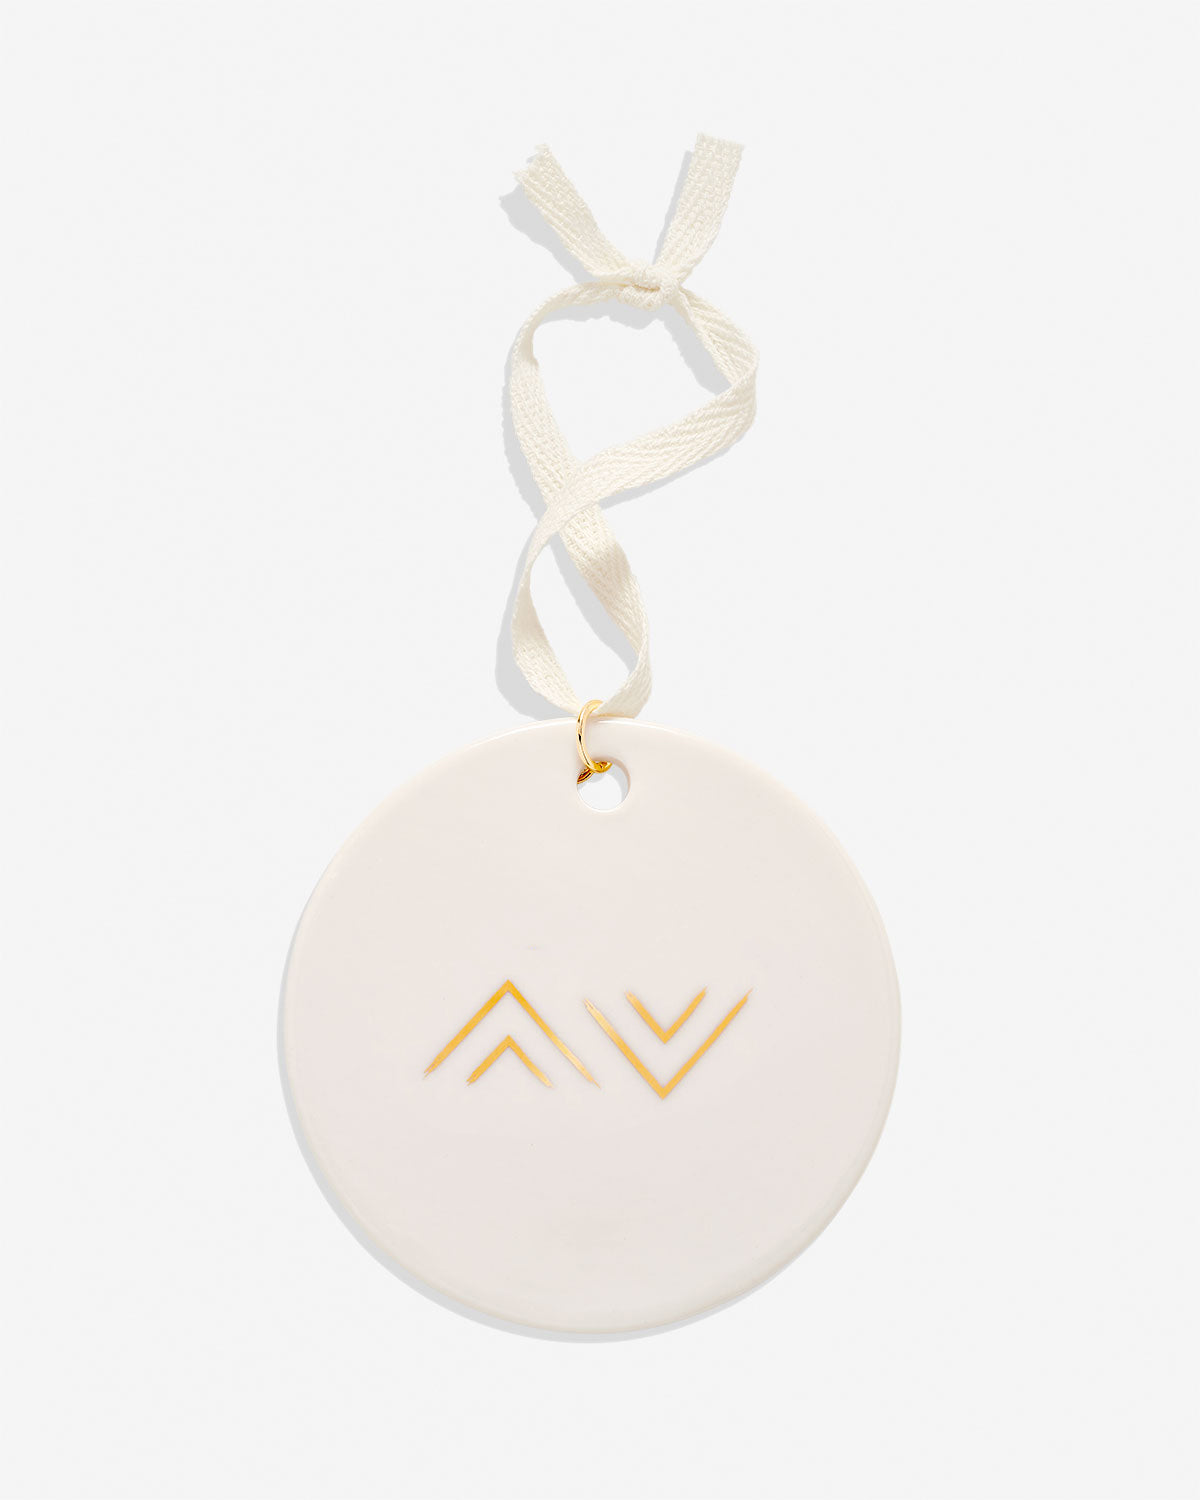 Bryan Anthonys Highs and Lows White Ceramic Holiday Ornament in Gold